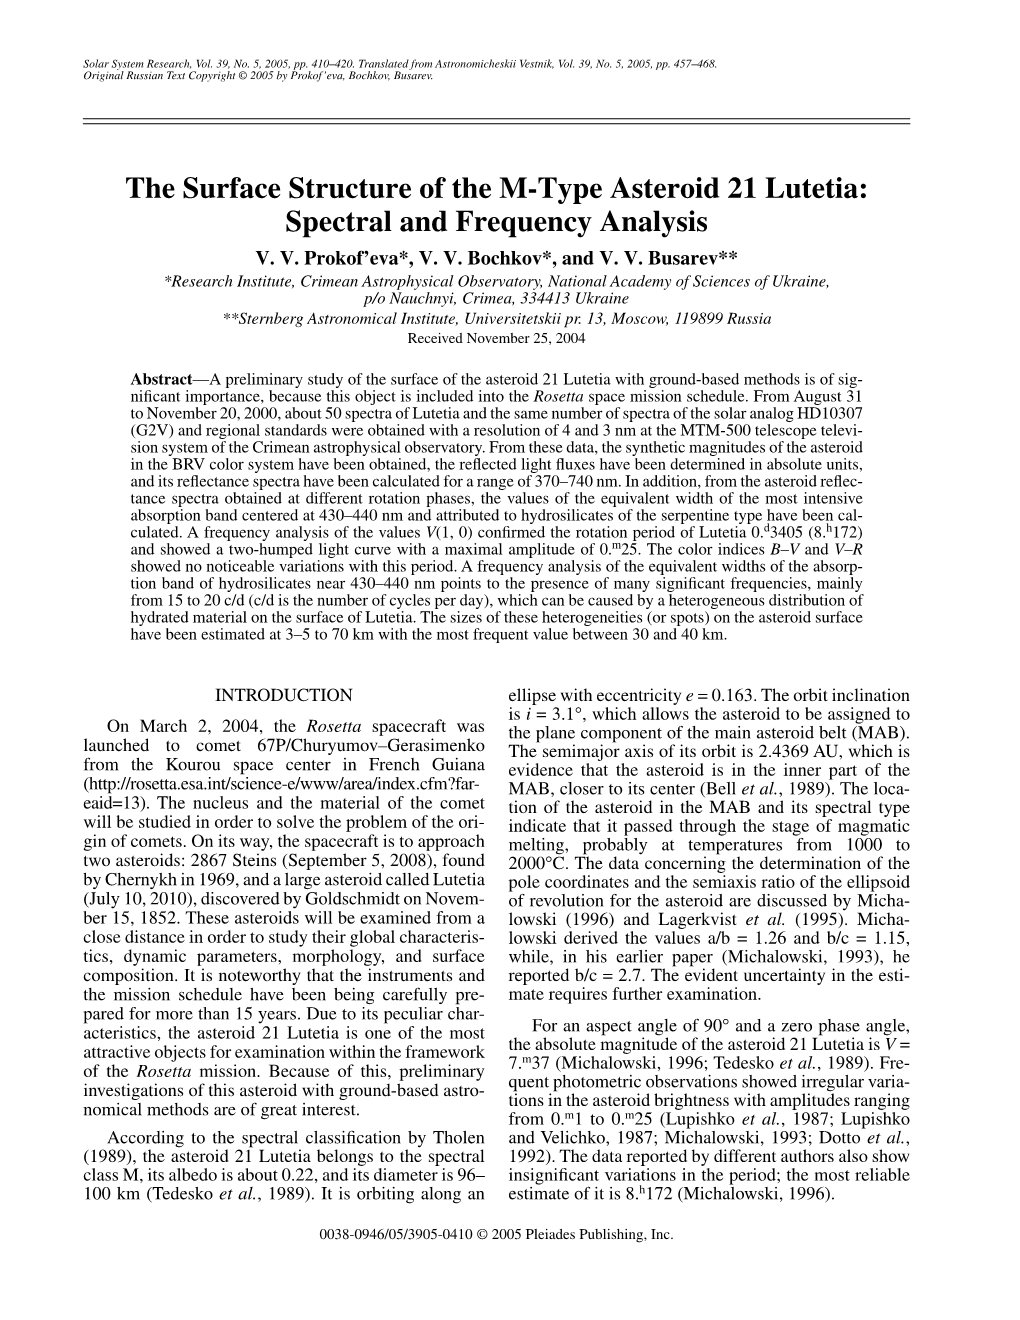 The Surface Structure of the M-Type Asteroid 21 Lutetia: Spectral and Frequency Analysis V